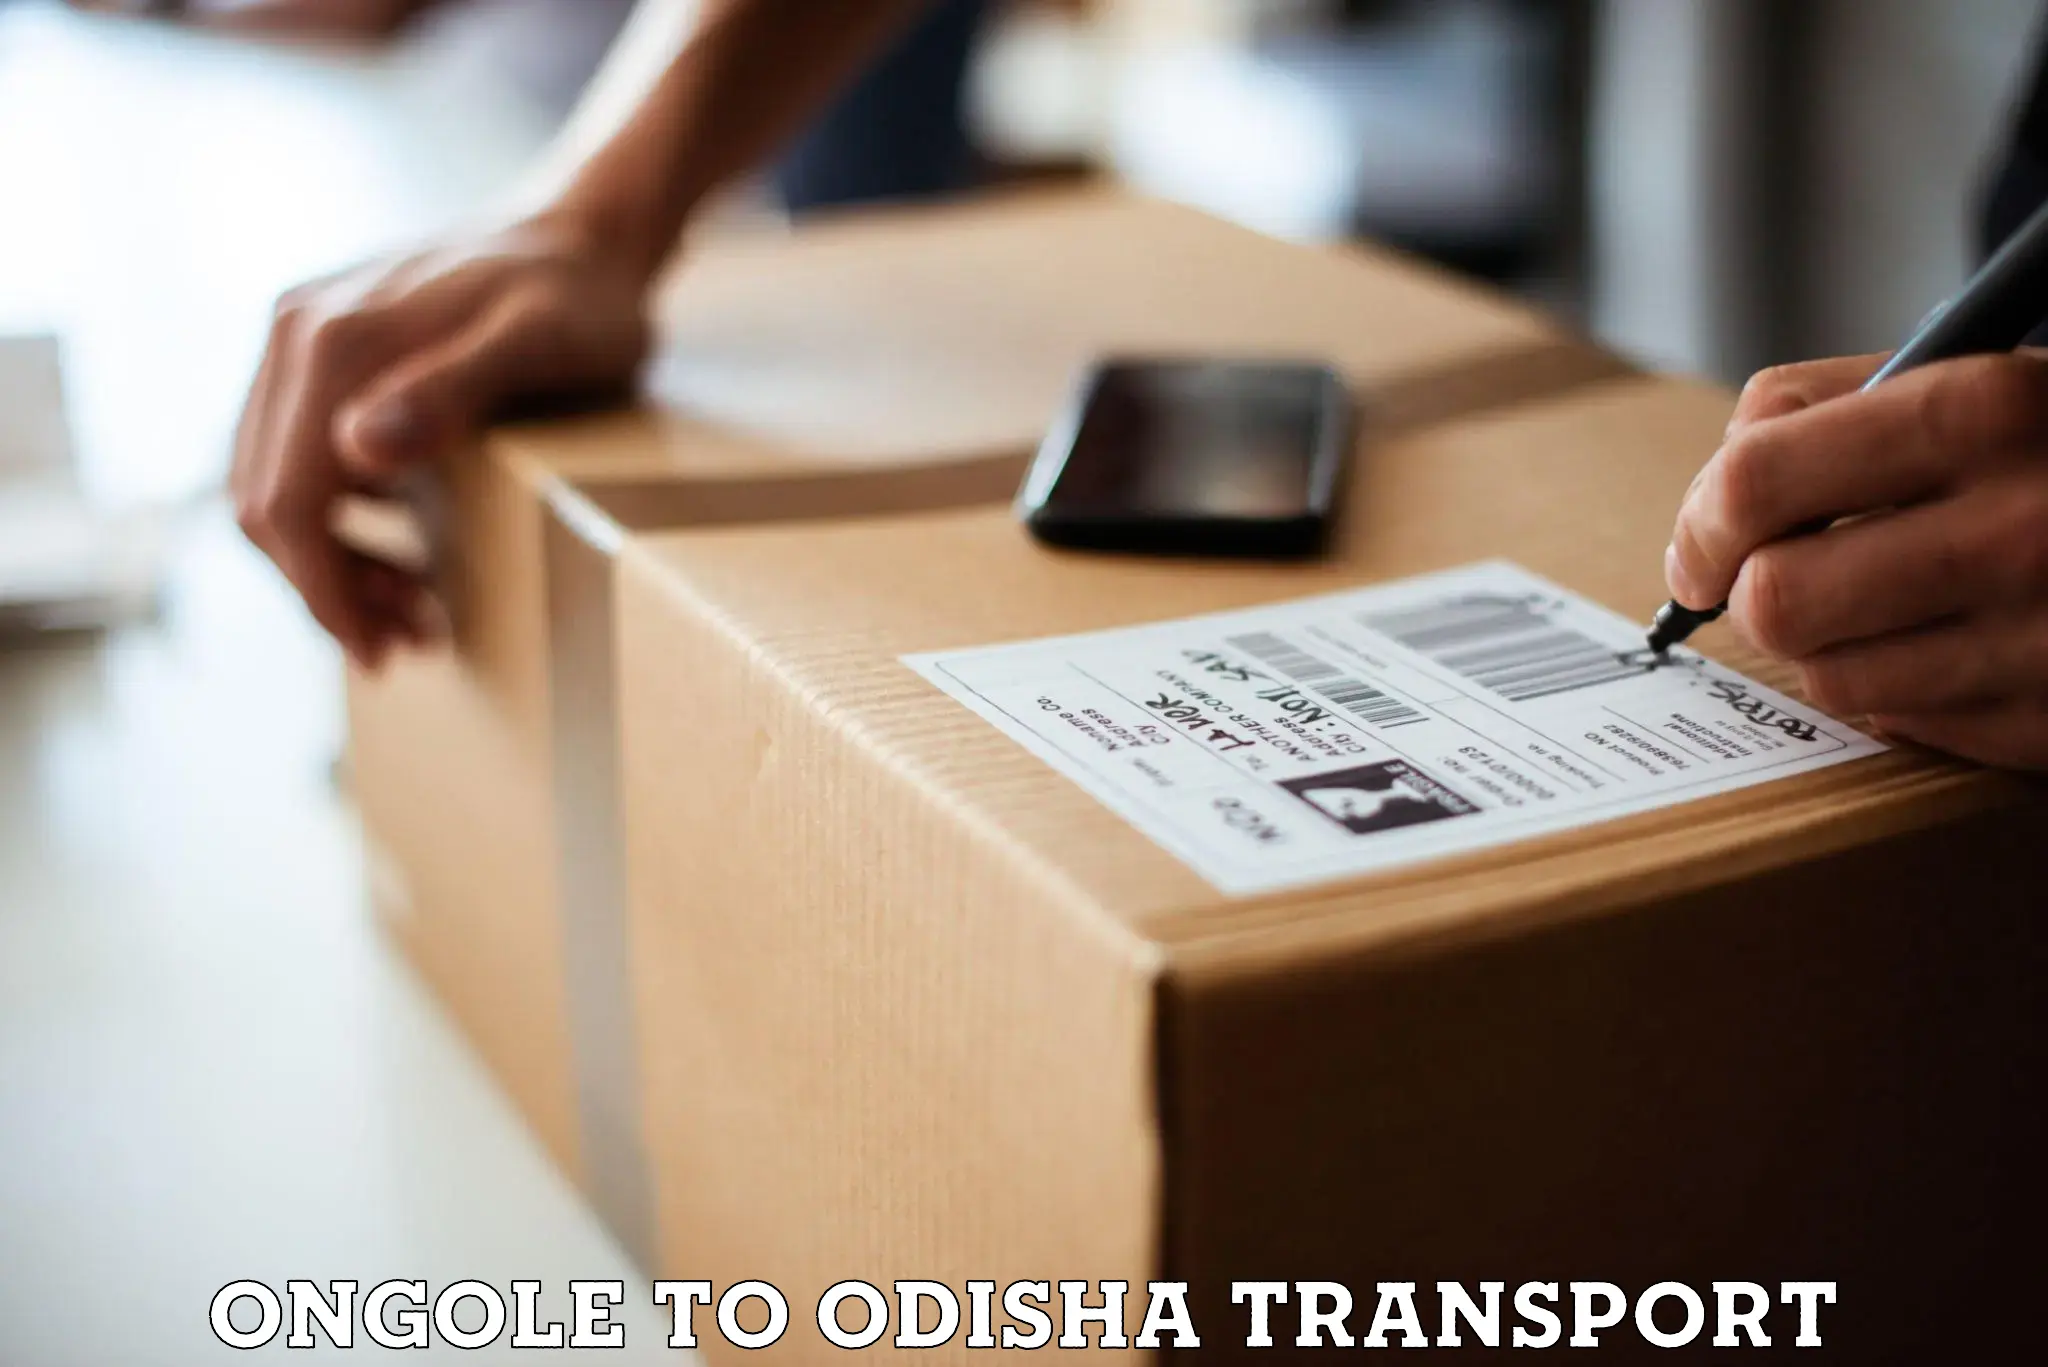 Delivery service Ongole to Rairakhol